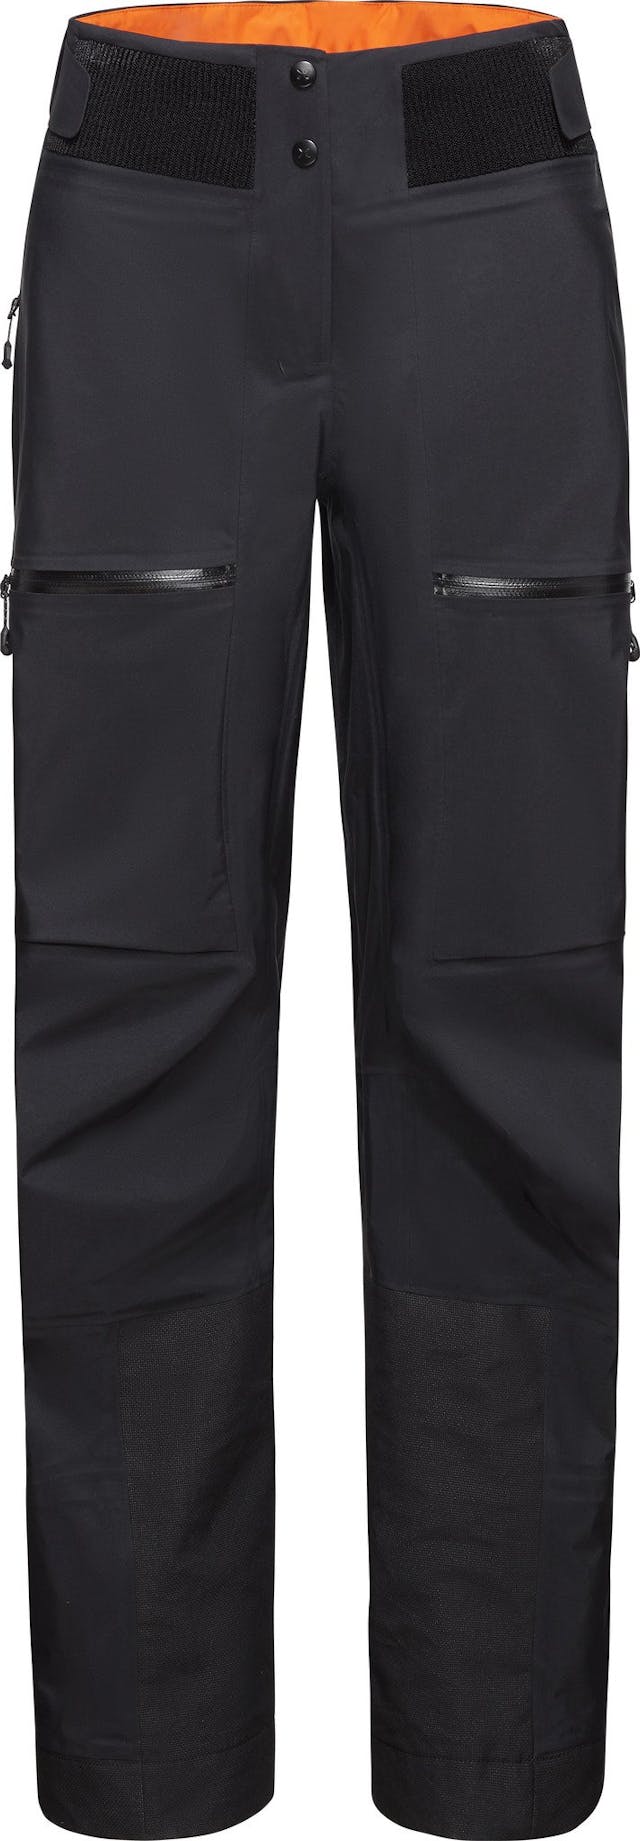 Product image for Eiger Free Advanced Hardshell Pants - Women's